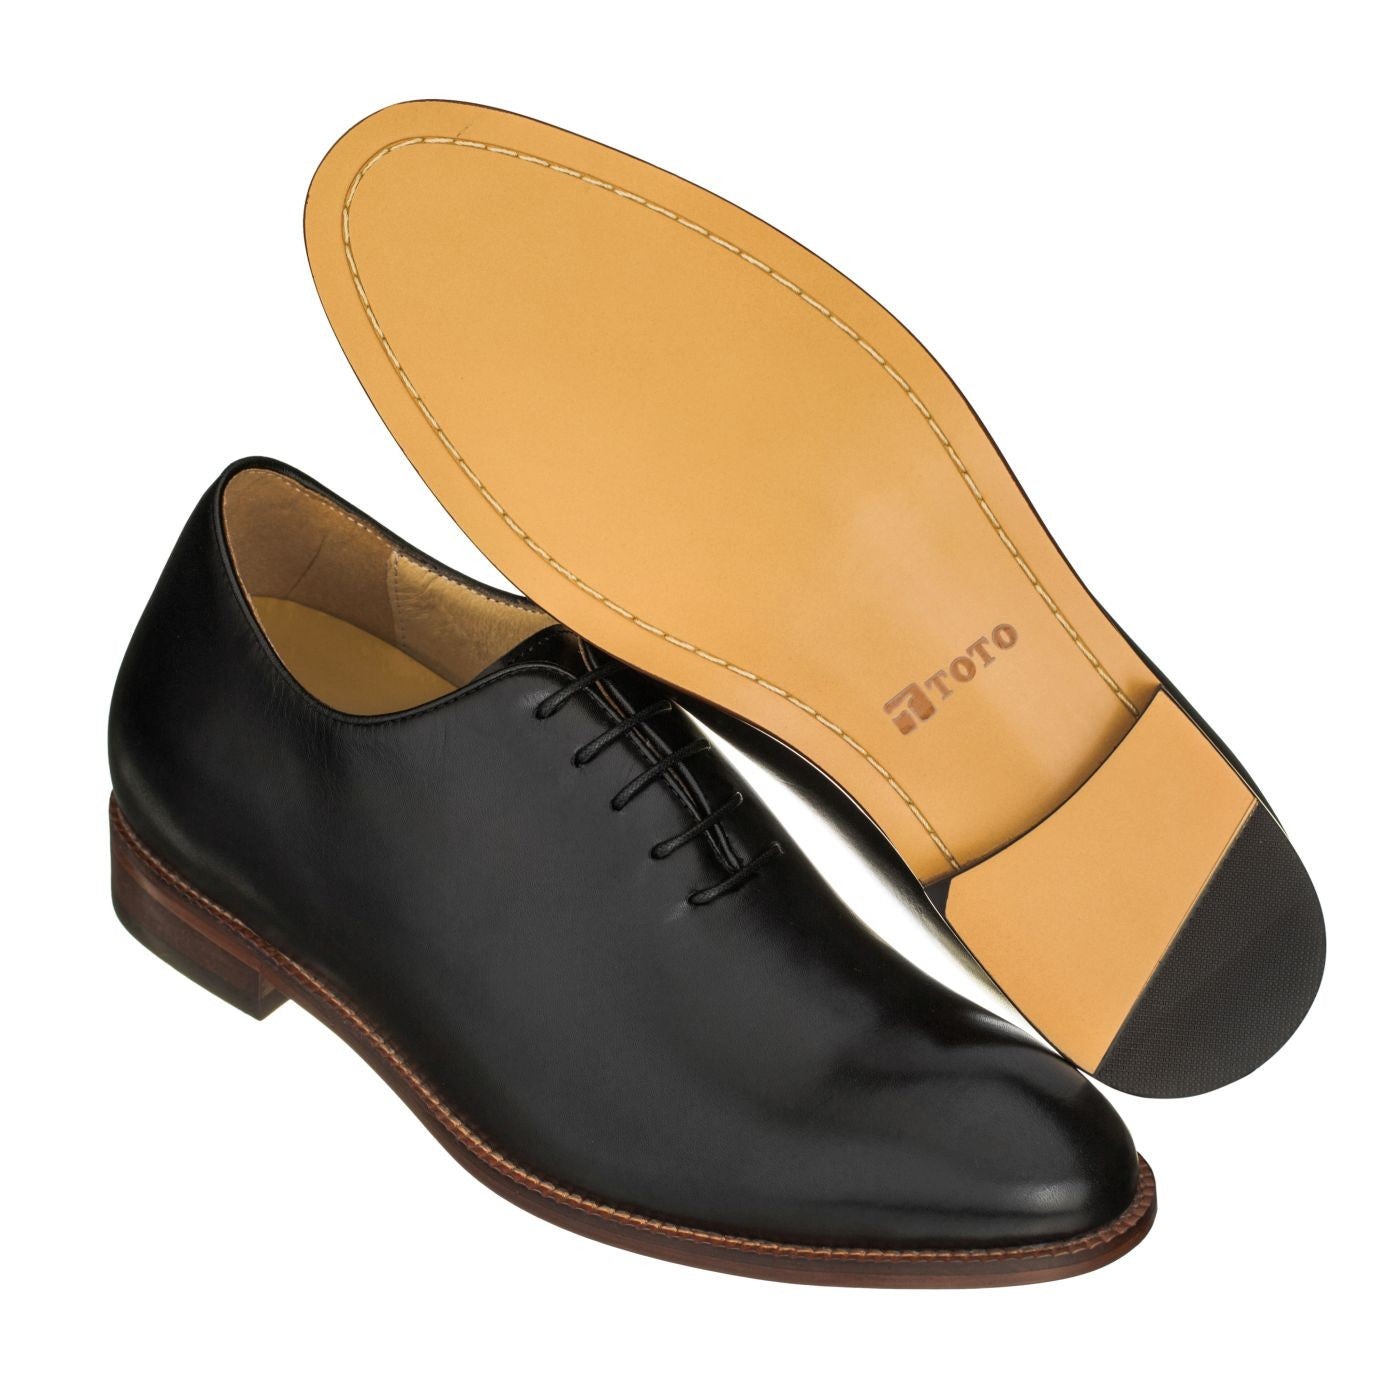 Elevator shoes height increase TOTO - S3001 - 2.6 Inches Taller (Black) Wholecut w/ Leather Sole